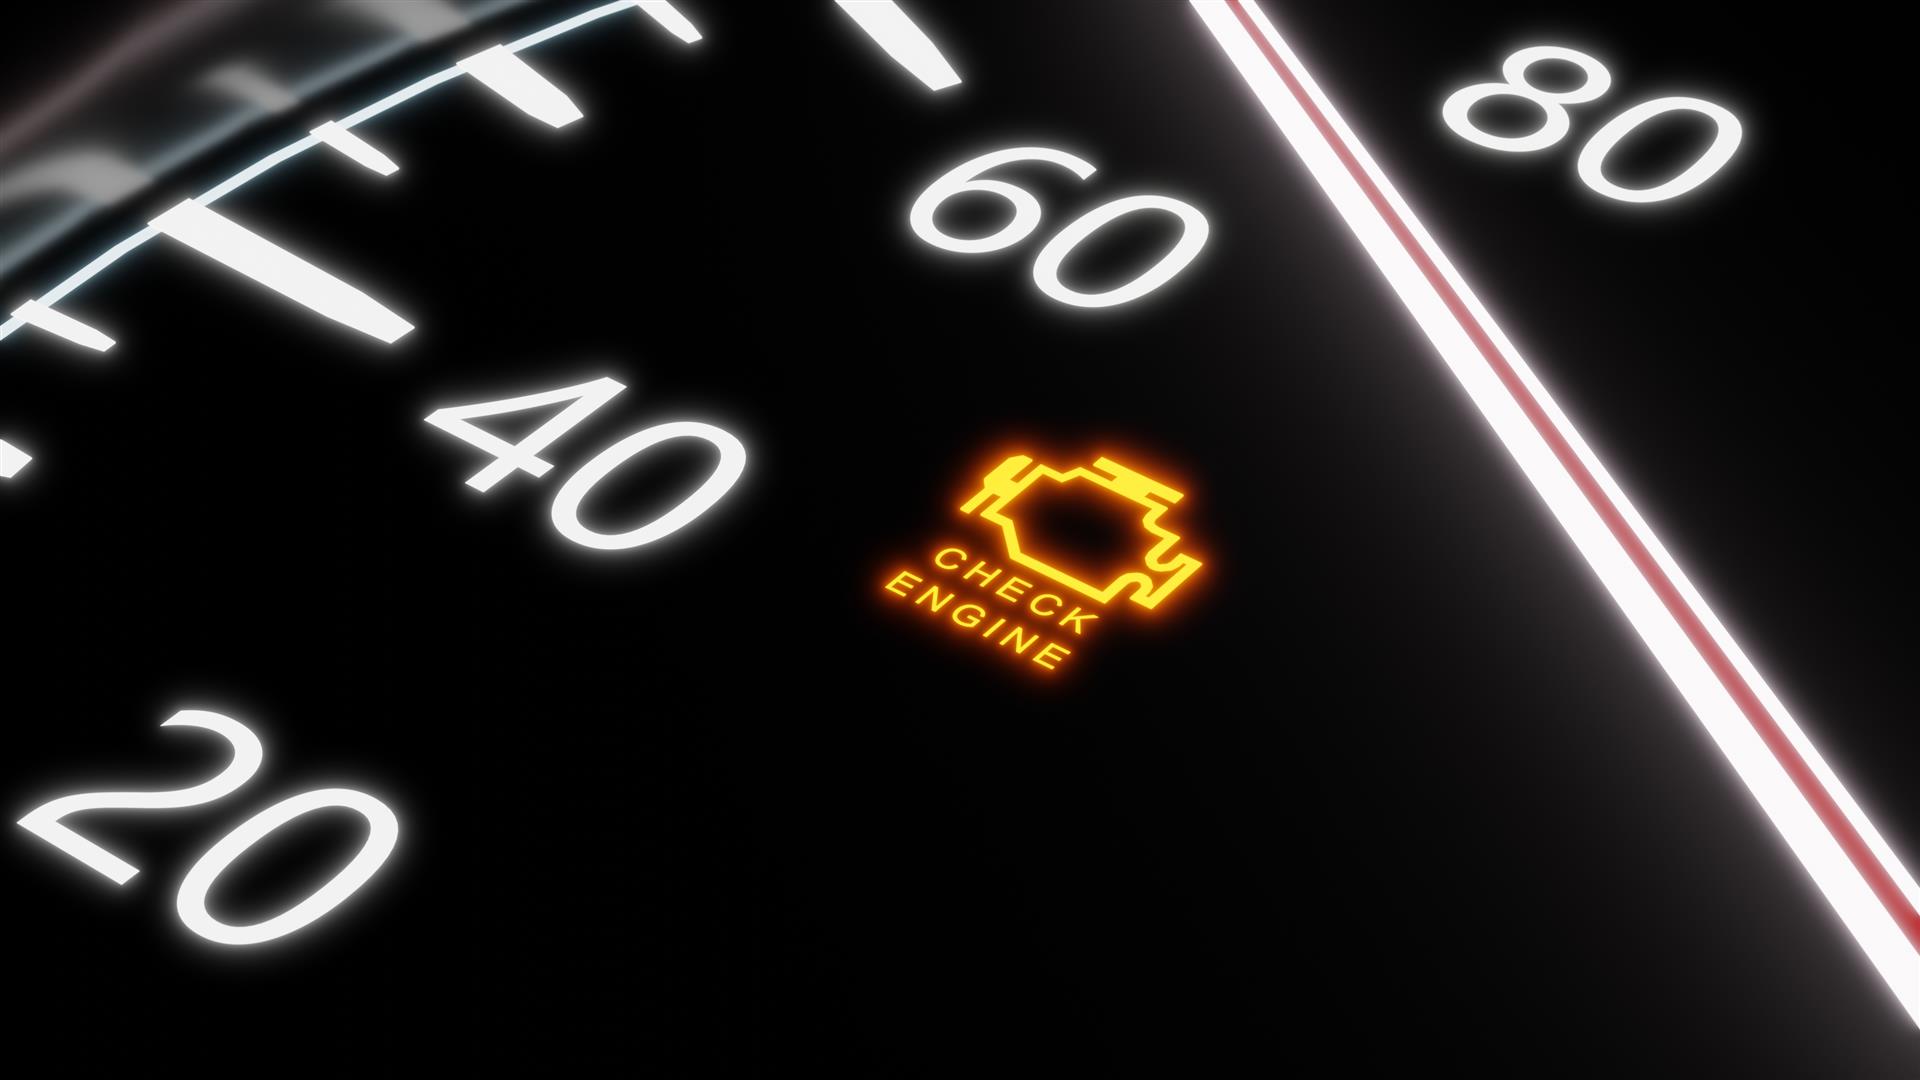 What You Should Do When The Check Engine Light Comes On